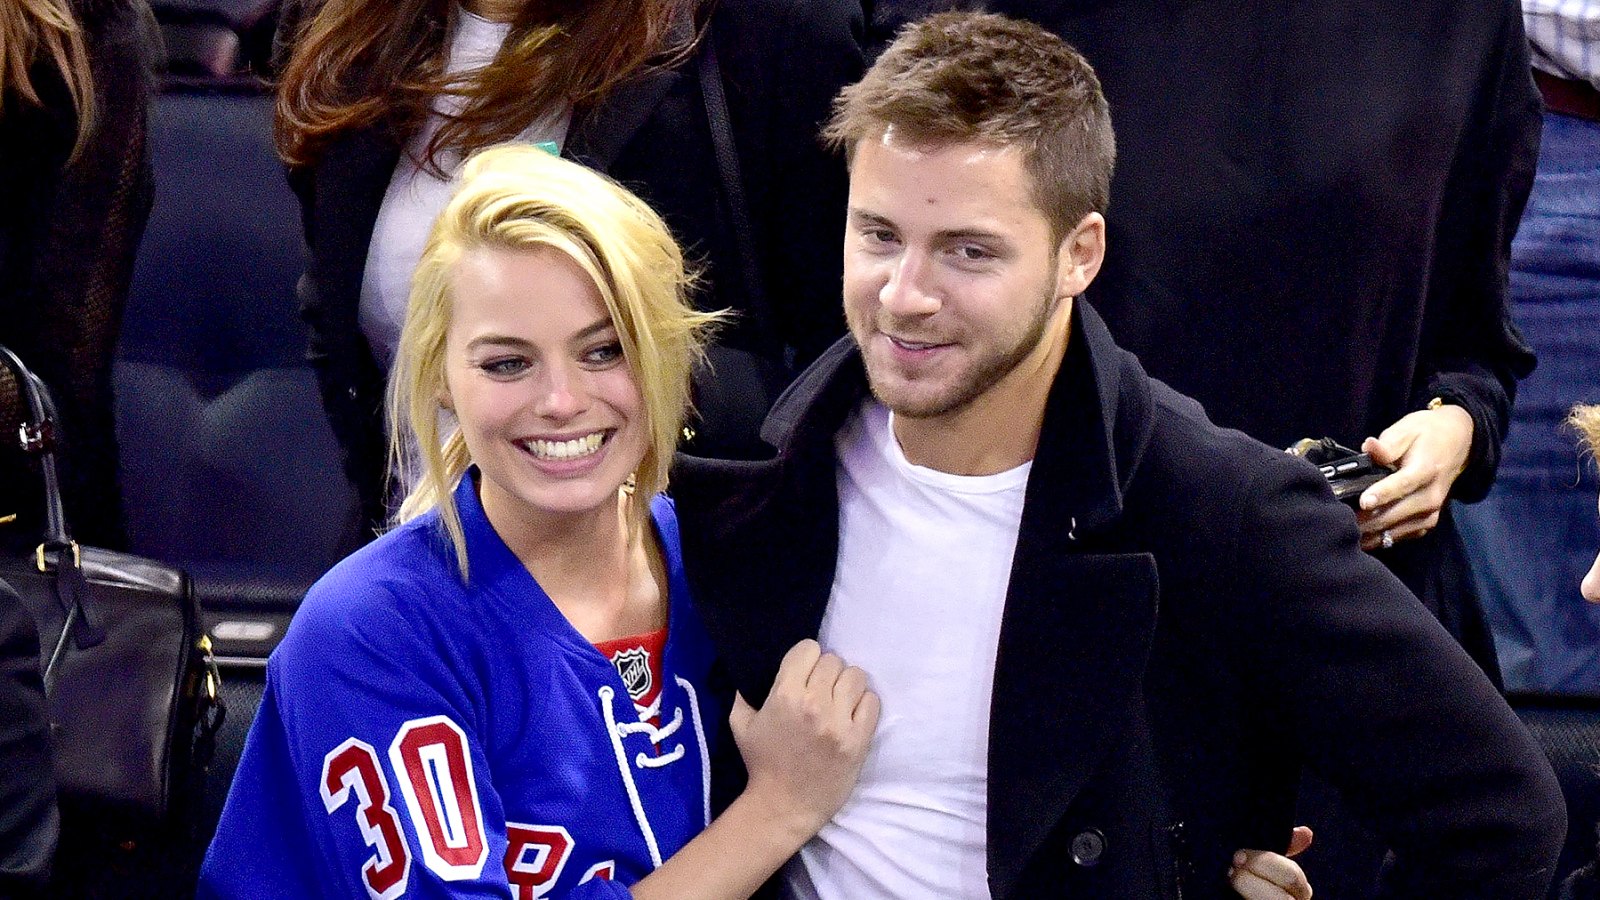 Margot Robbie and Tom Ackerley attend the Arizona Coyotes vs New York Rangers game at Madison Square Garden in New York City on February 26, 2015.